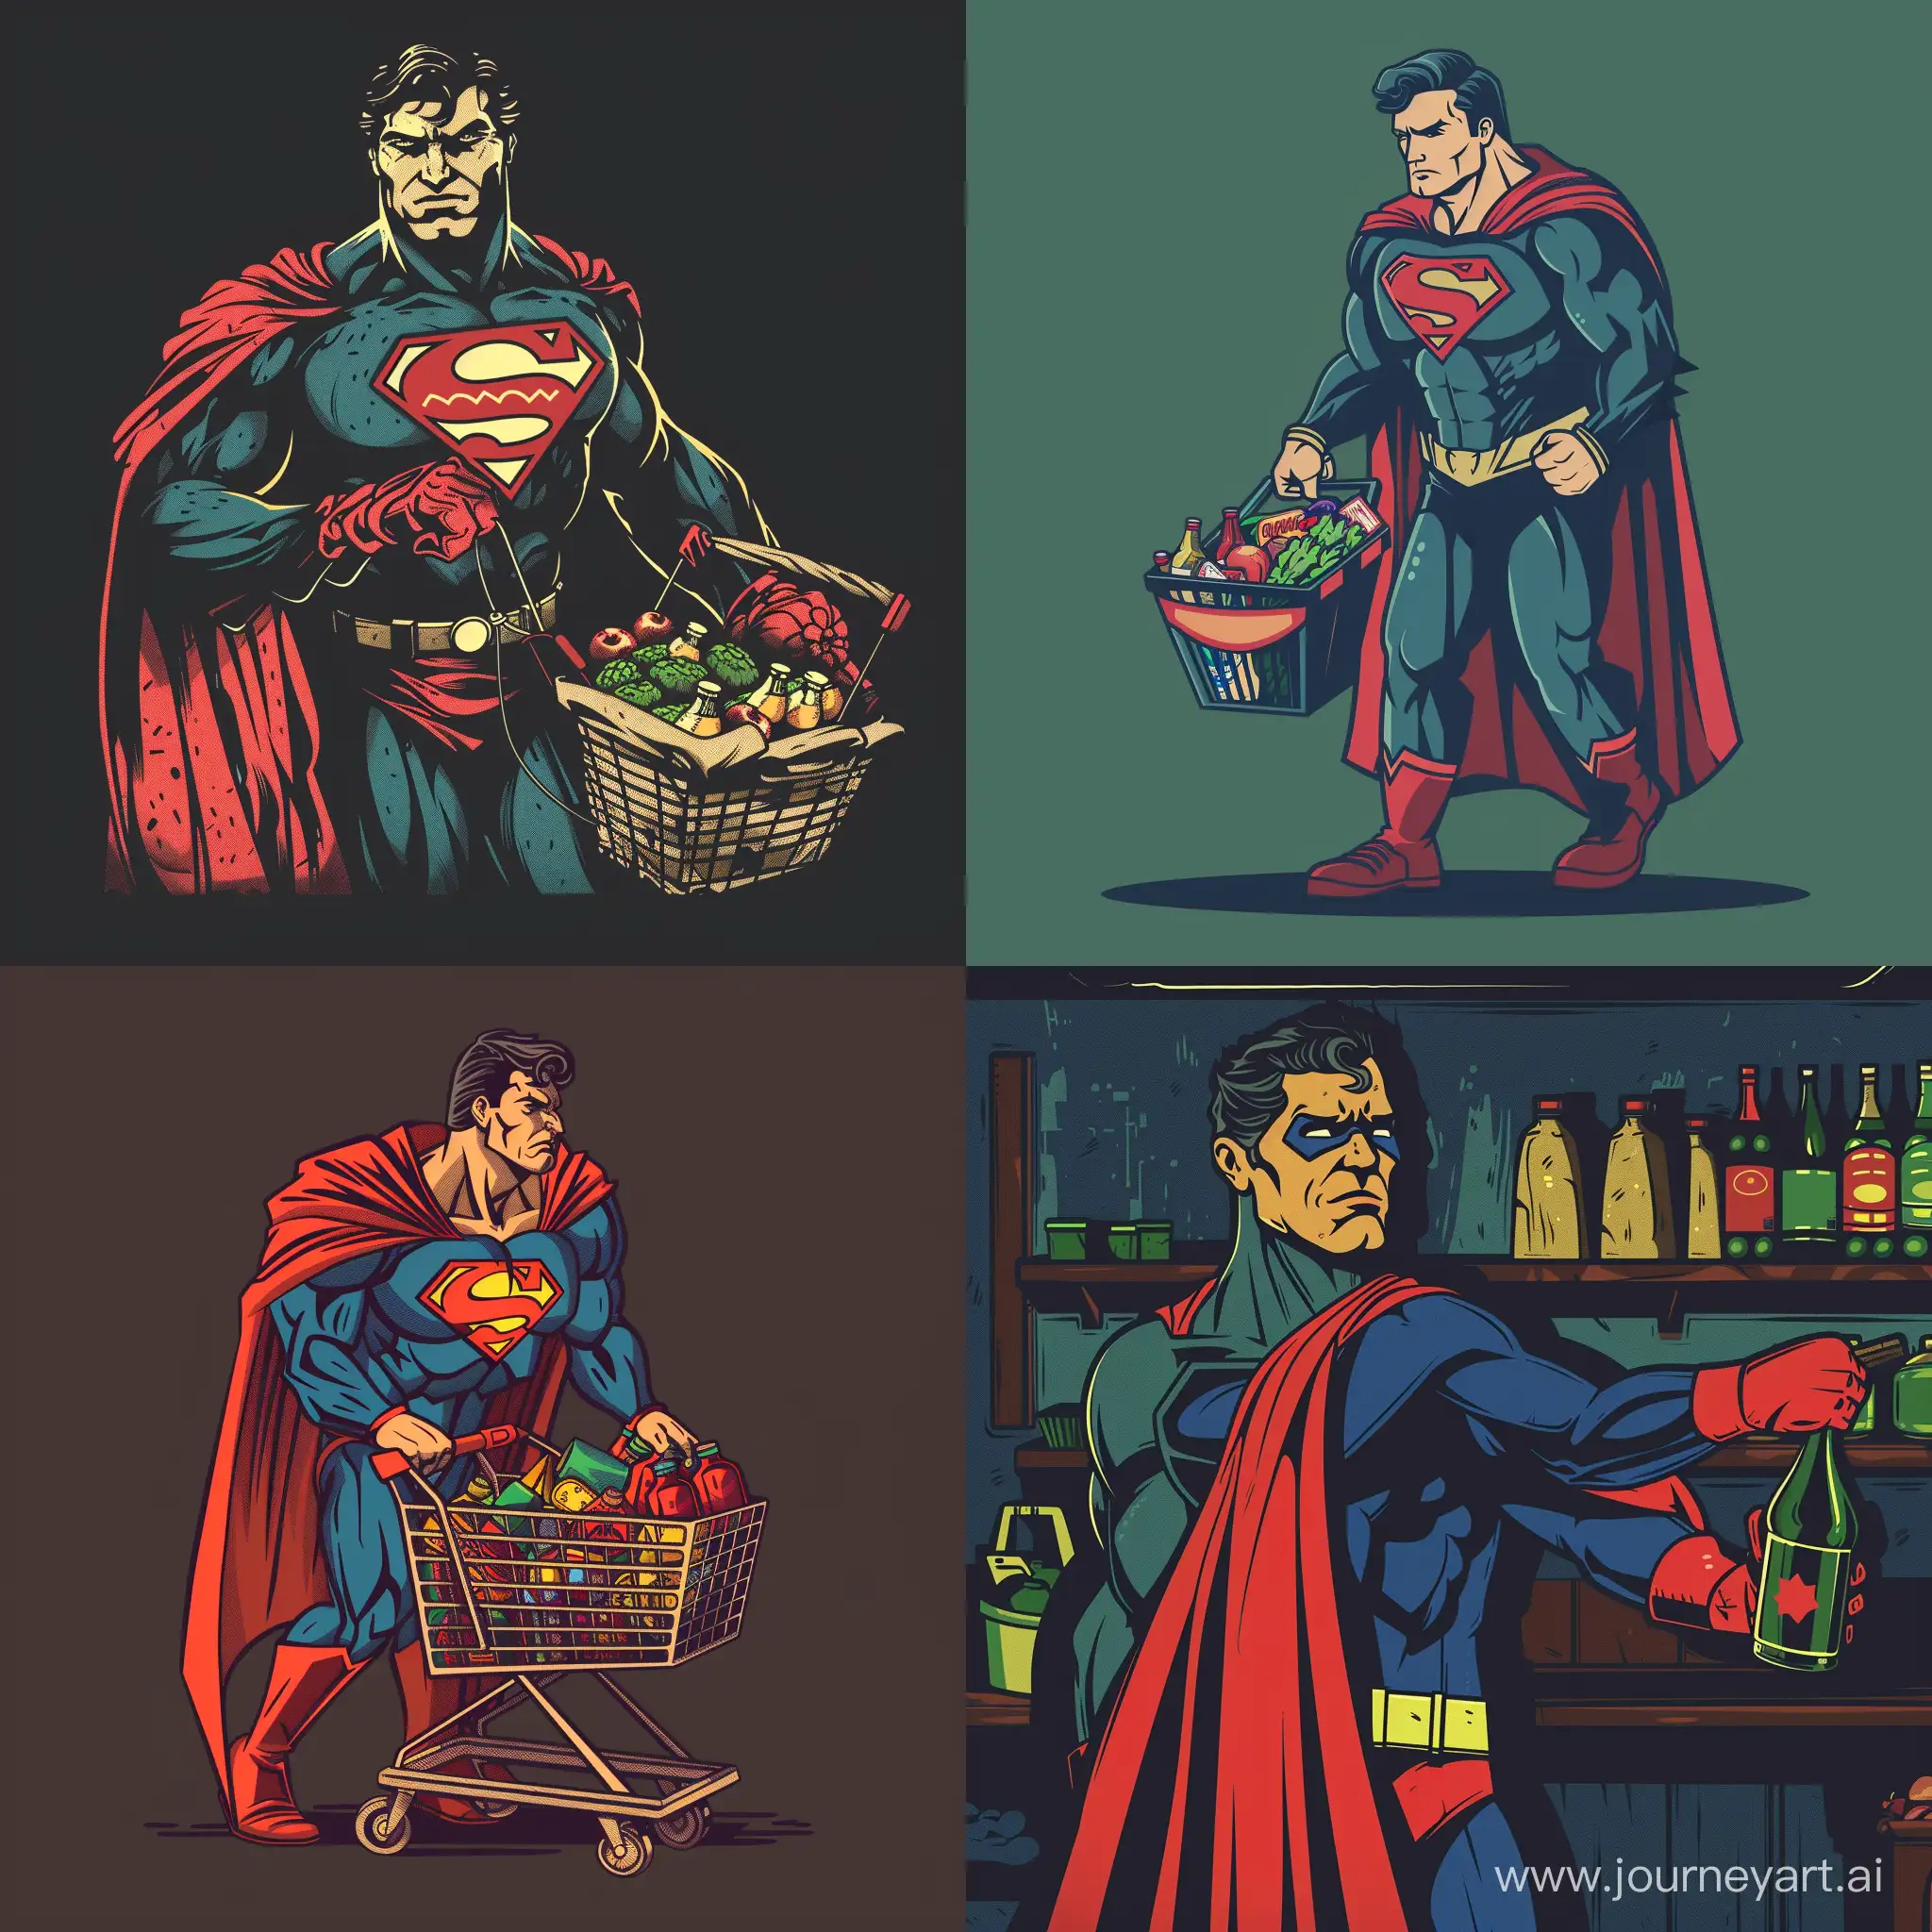 Superhero Doing Groceries: A down-to-earth moment showing even heroes deal with daily chores. Make it in a graphic style that can be used for t-shirts